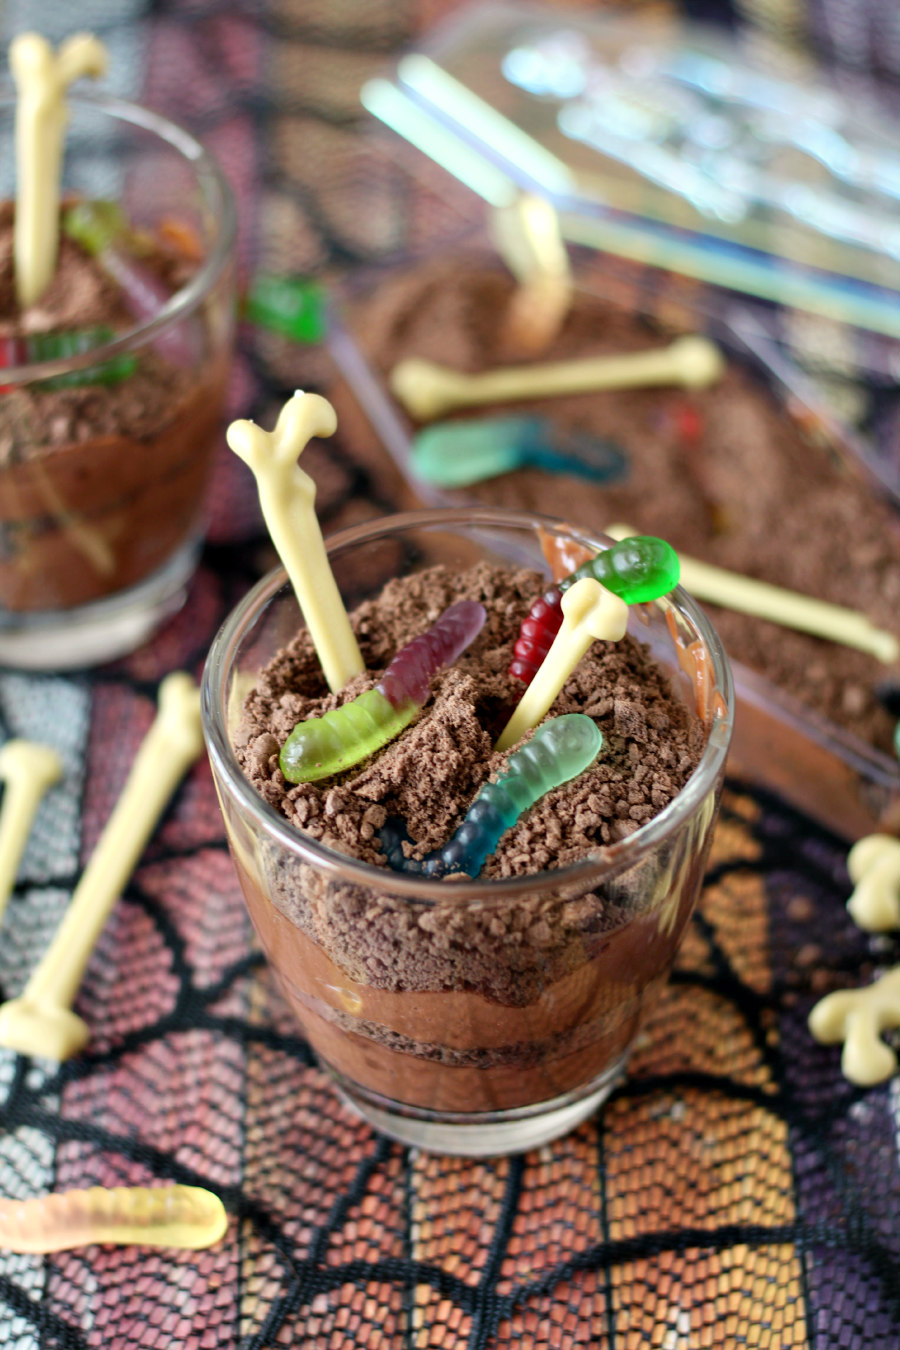 Cups and plastic coffin of Dirt and Worm Chocolate Pudding decorated with gummy worms and plastic bones.